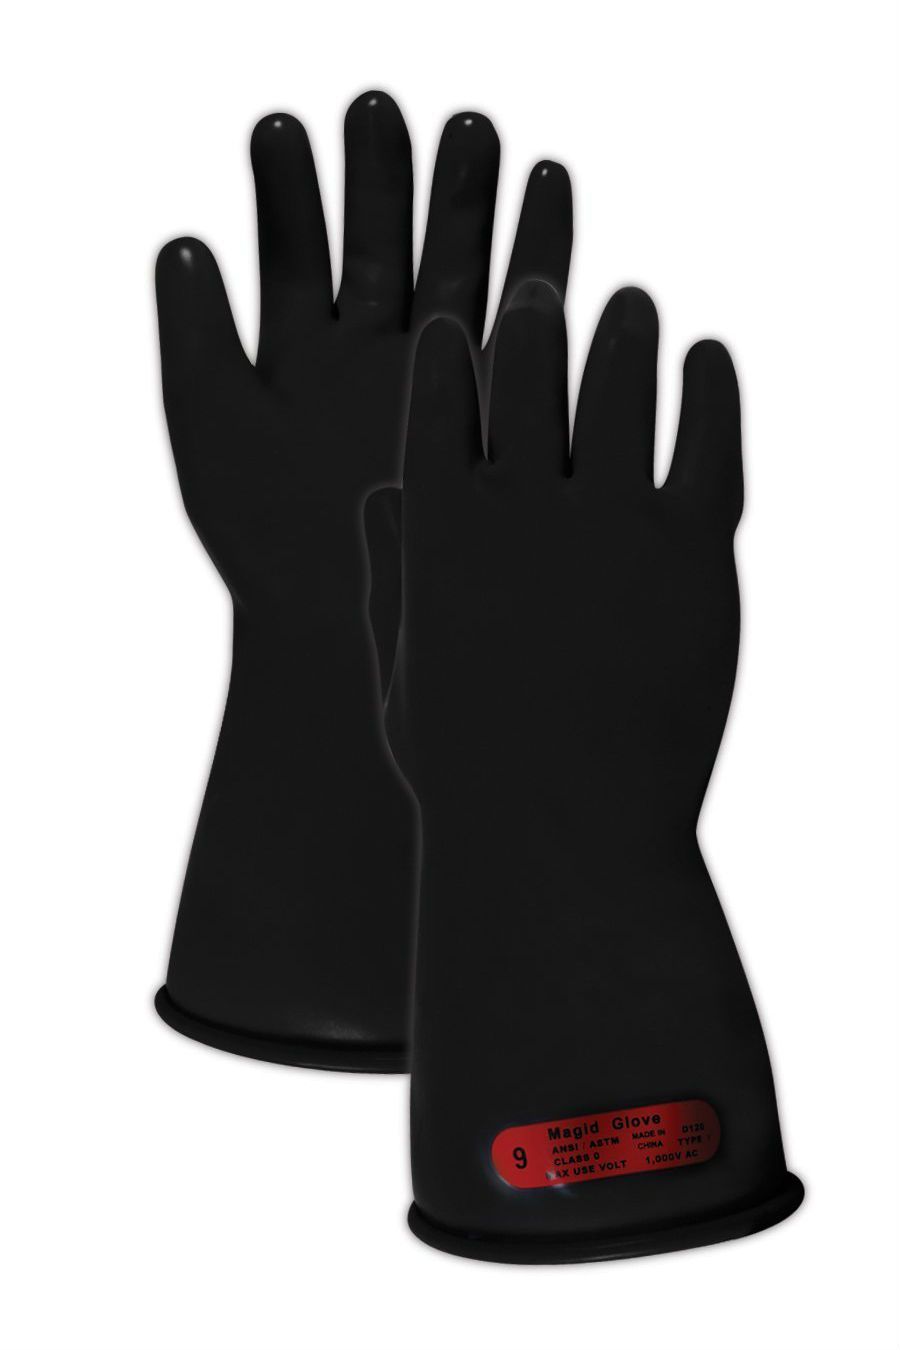 Magid Safety Electrical Gloves